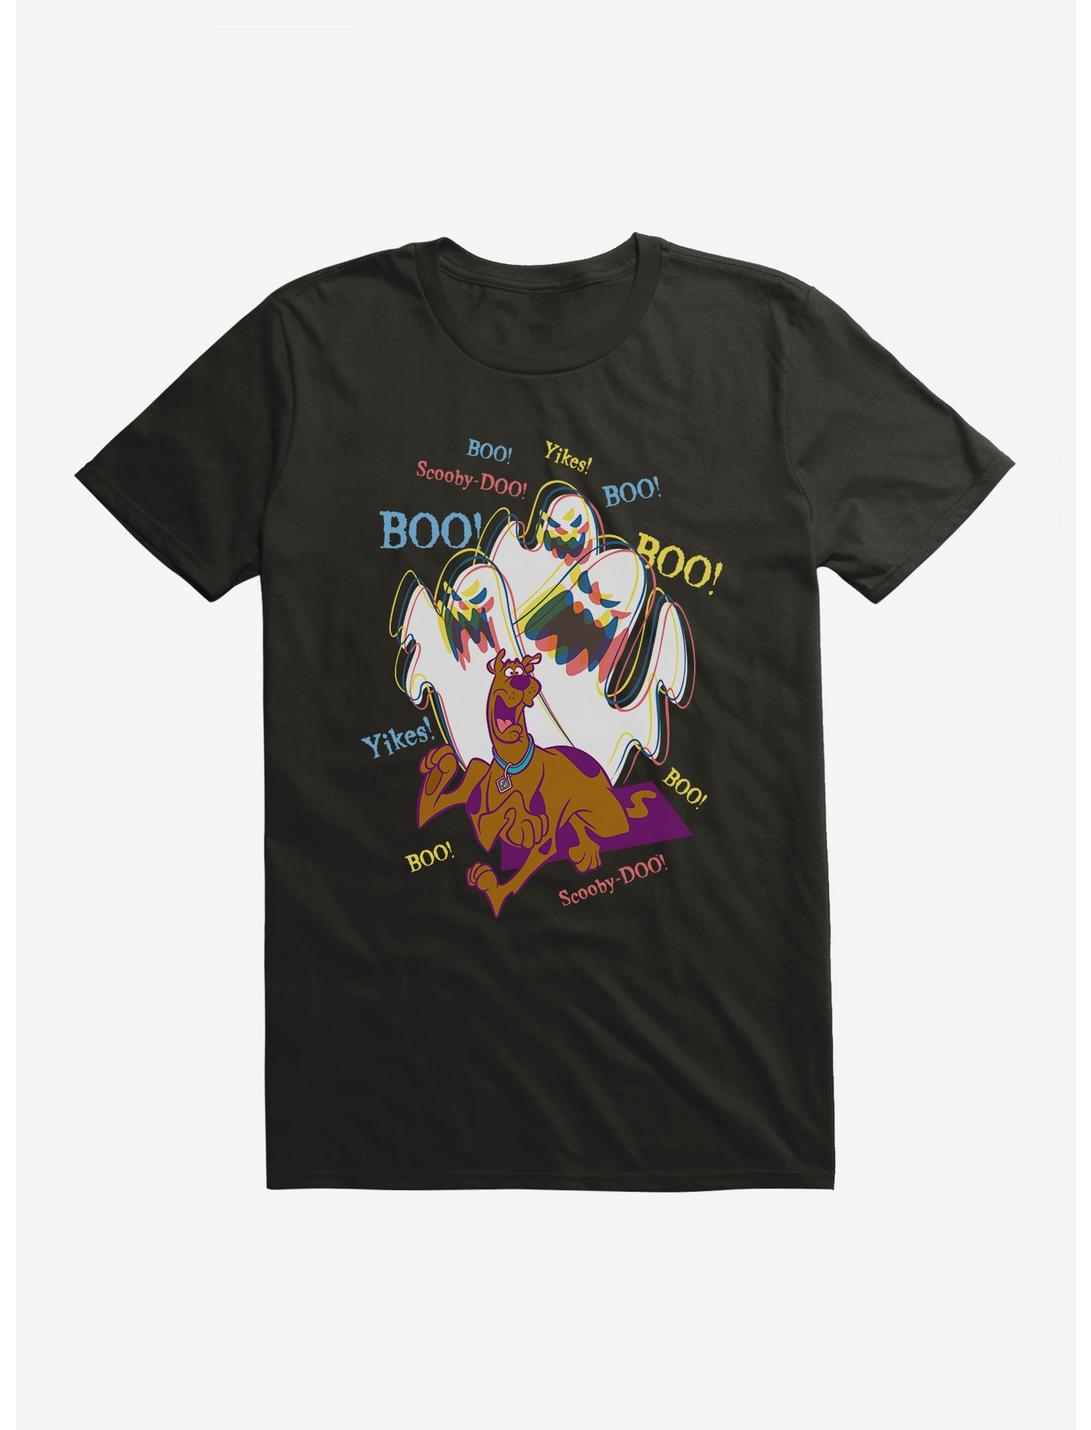 Scooby-Doo YIKES! Ghosts! T-Shirt, BLACK, hi-res